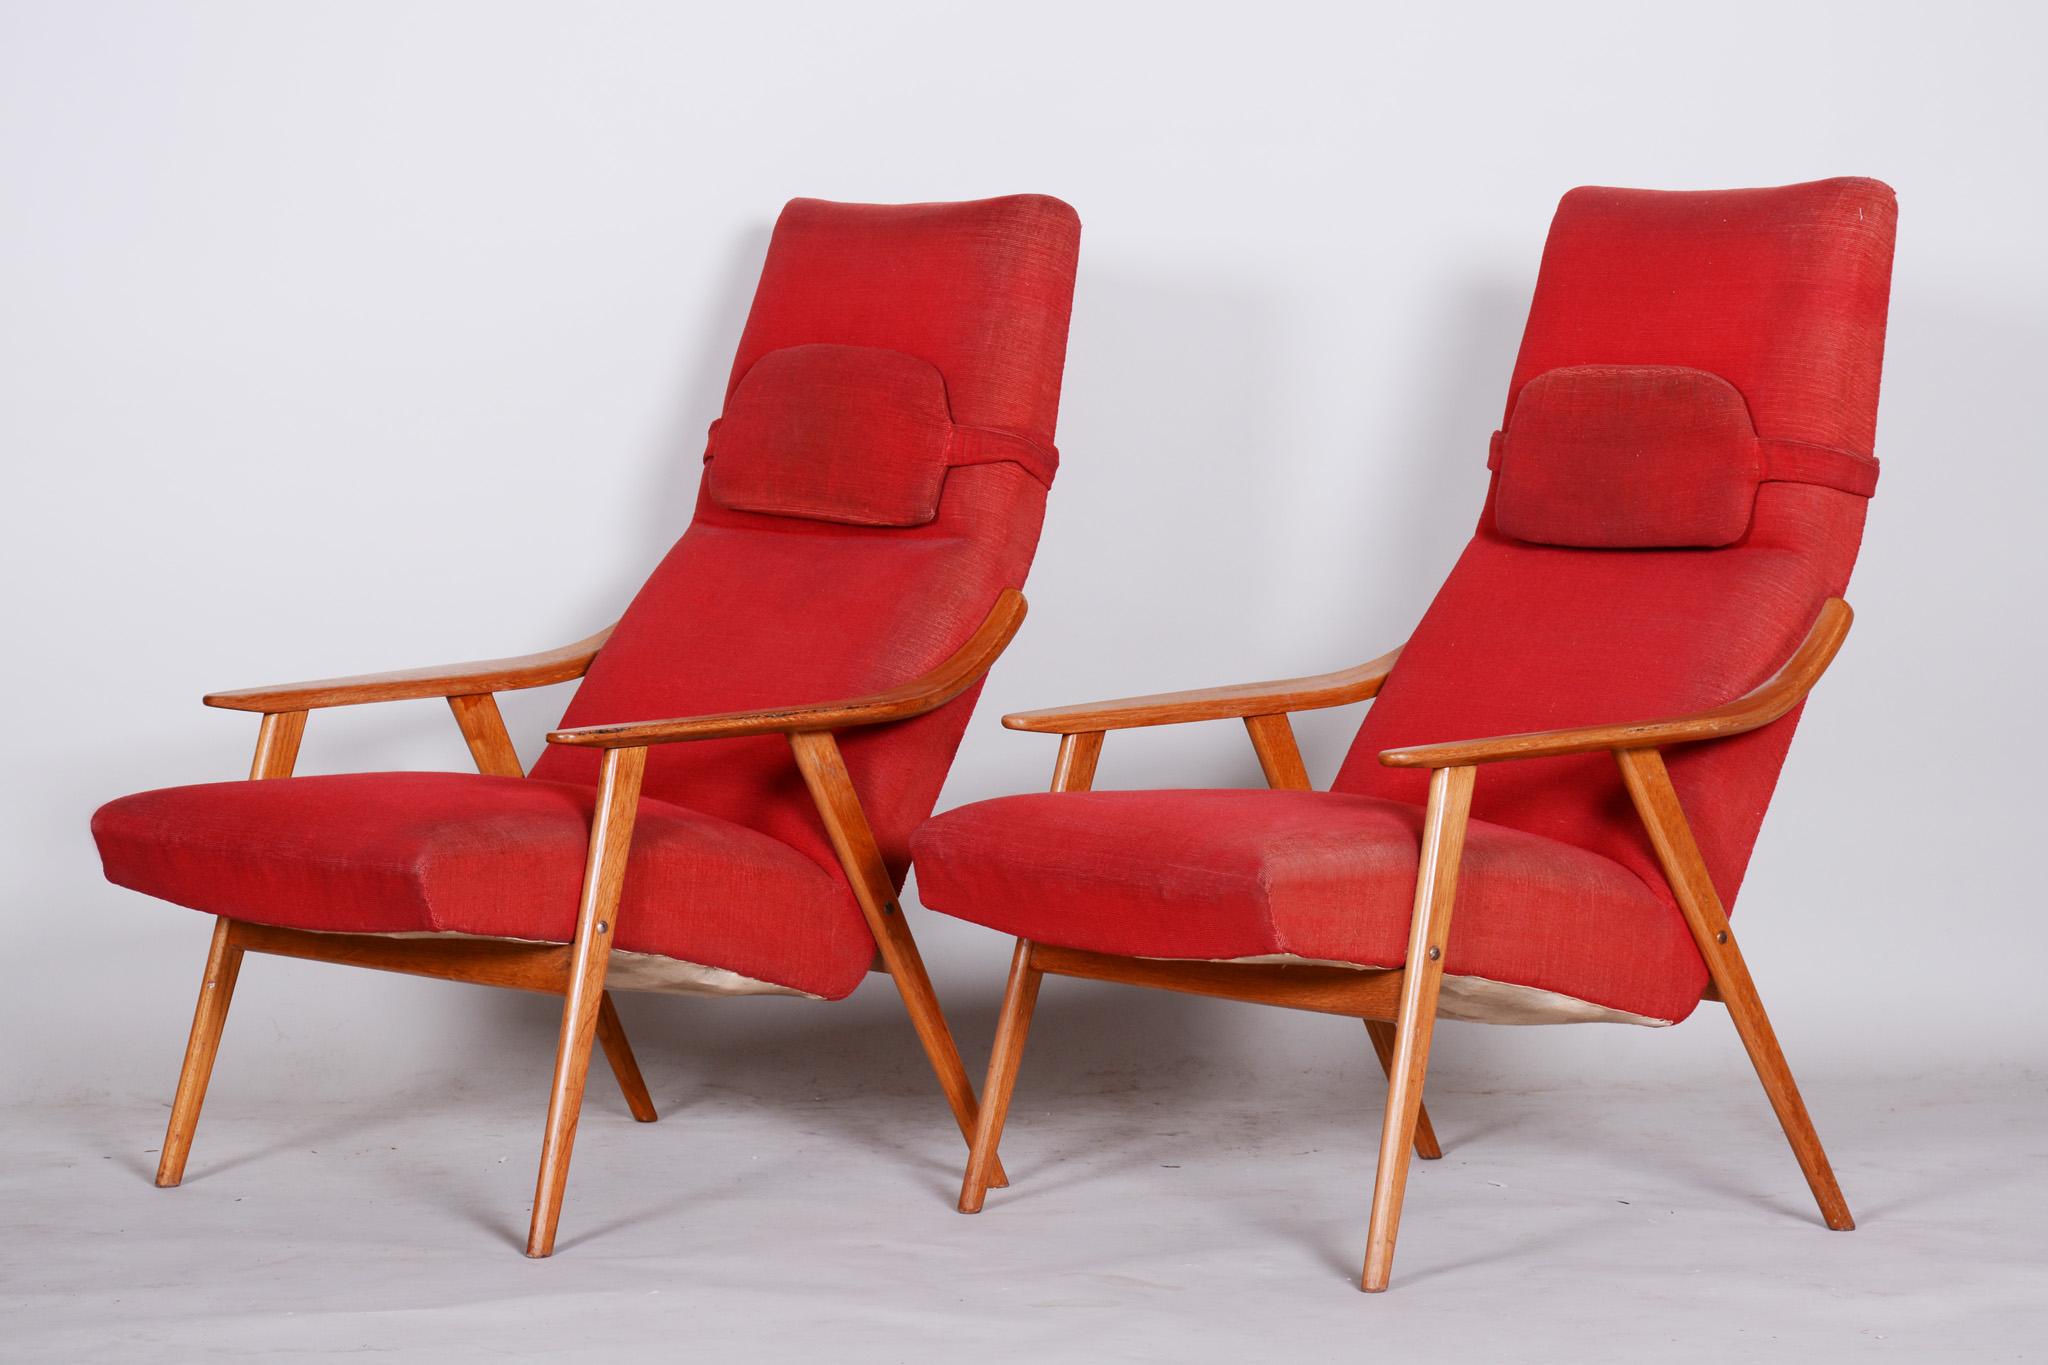 Pair of midcentury armchairs.
Original preserved condition
Source: Czechia
Material: Oak
Period: 1950-1959.